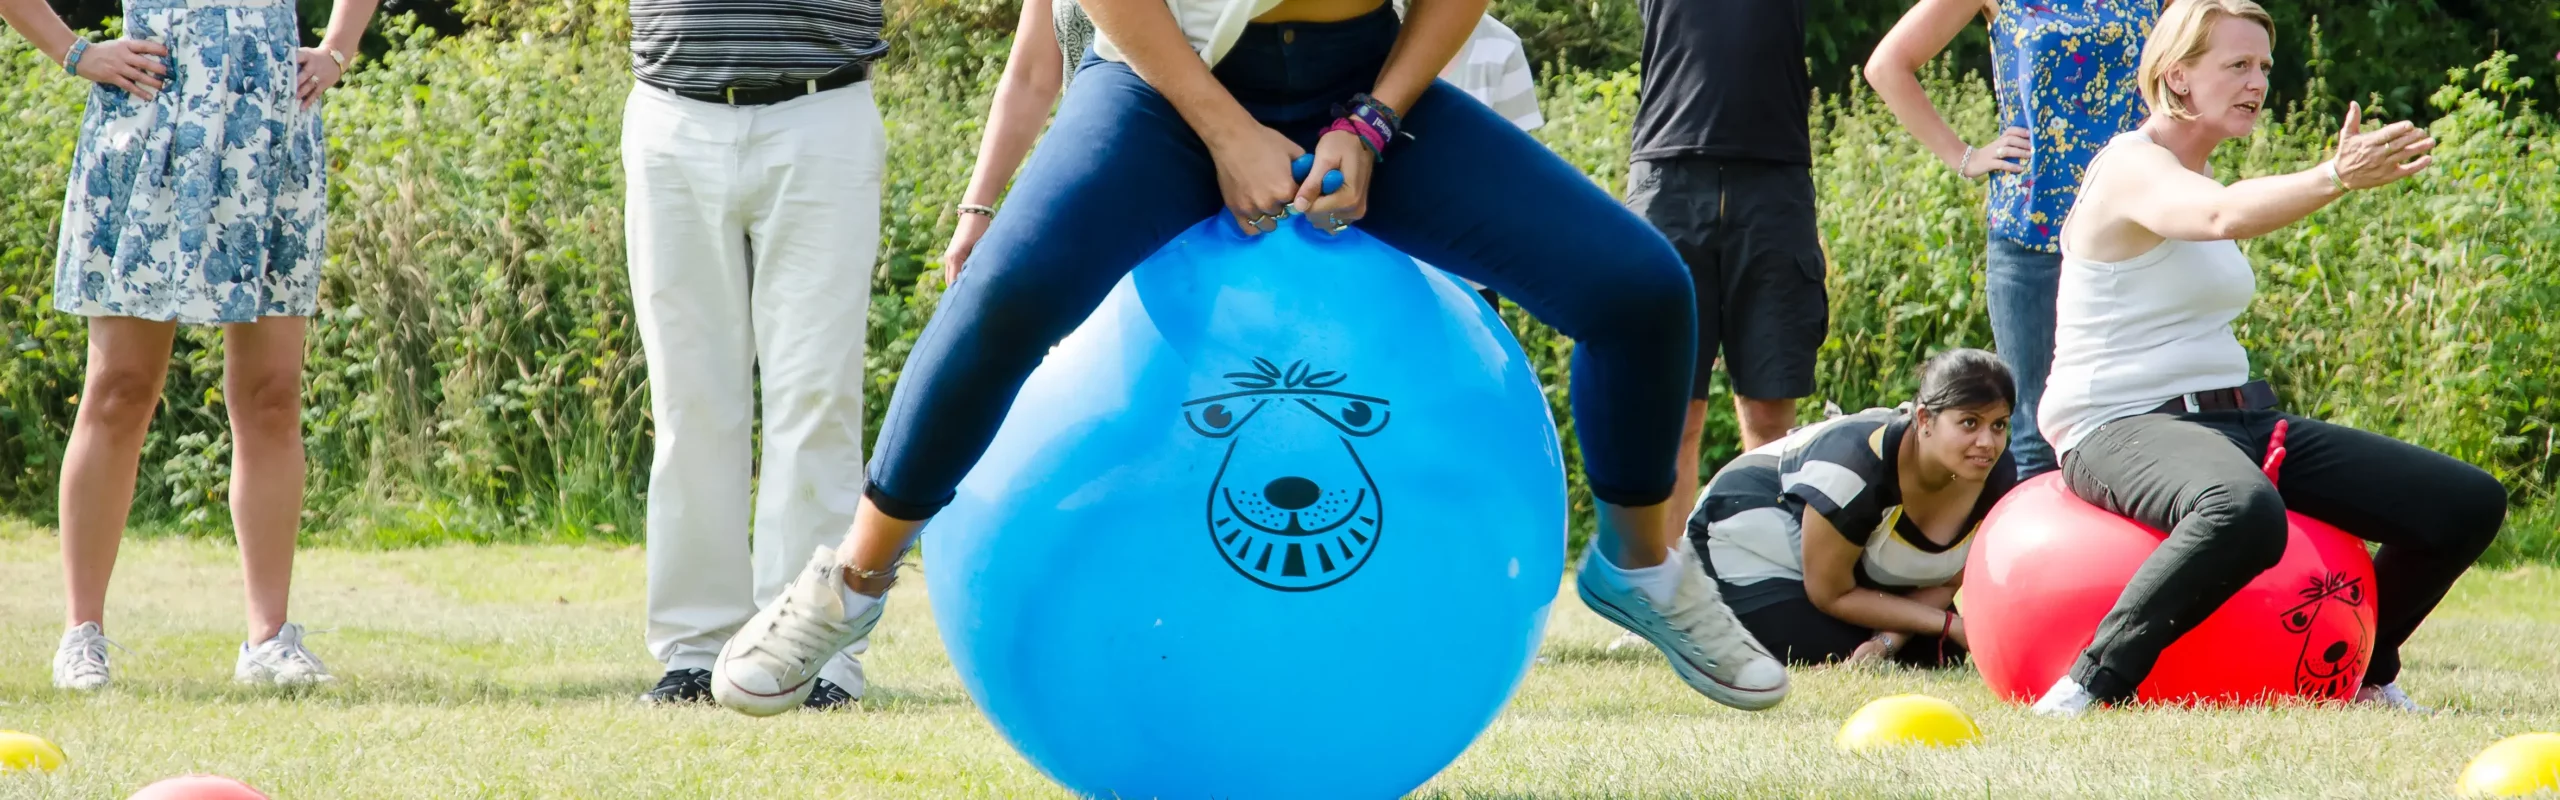 women jumping on blue space hopper in team building event